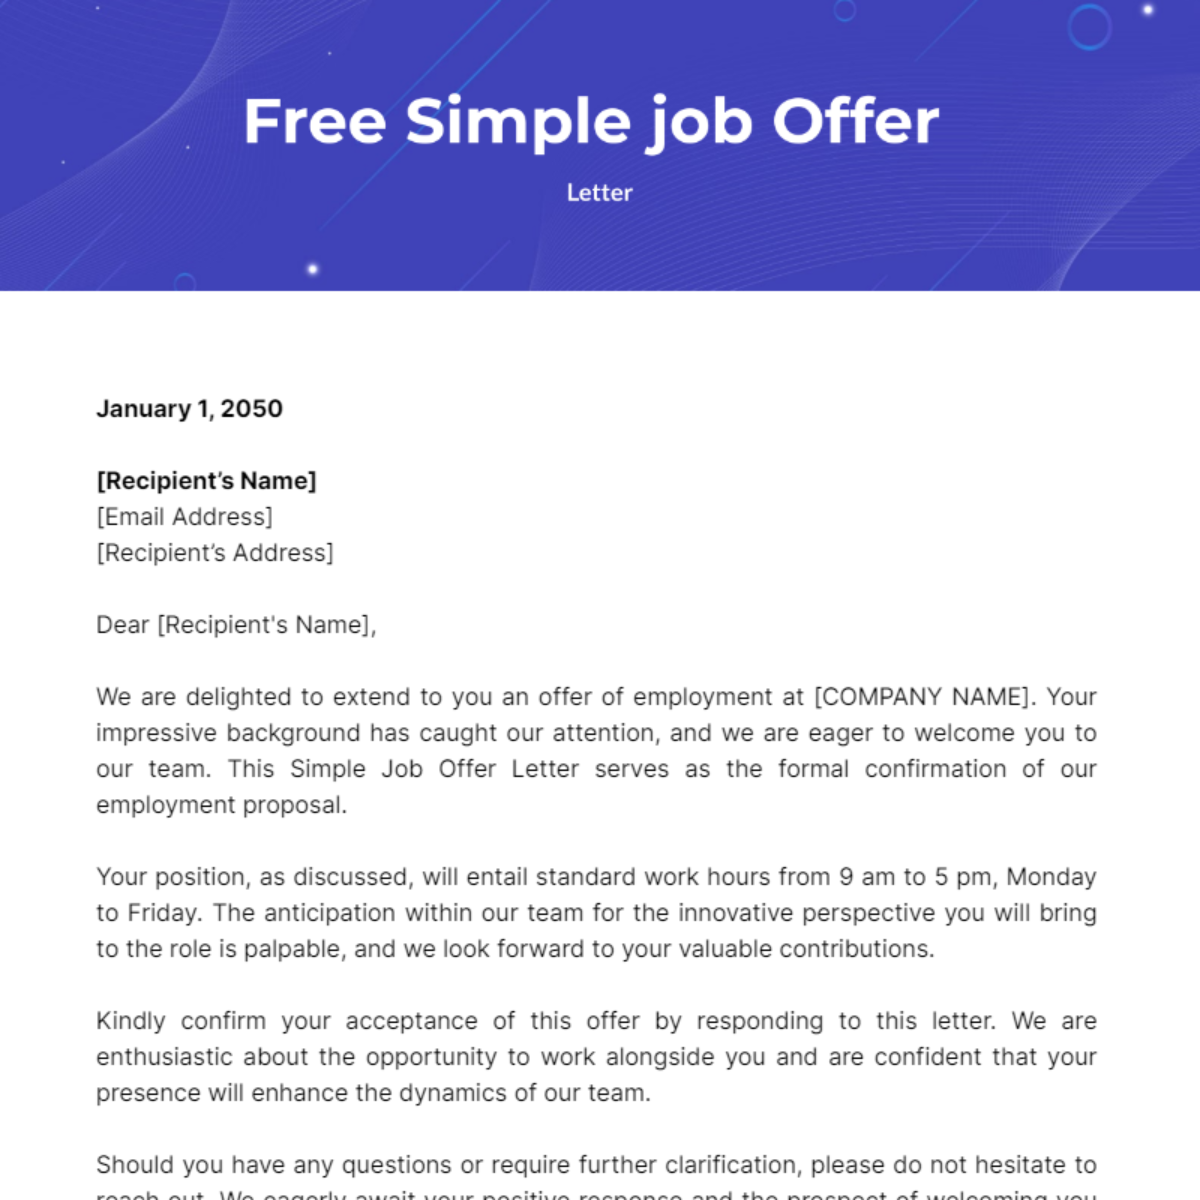 Simple job Offer Letter Template